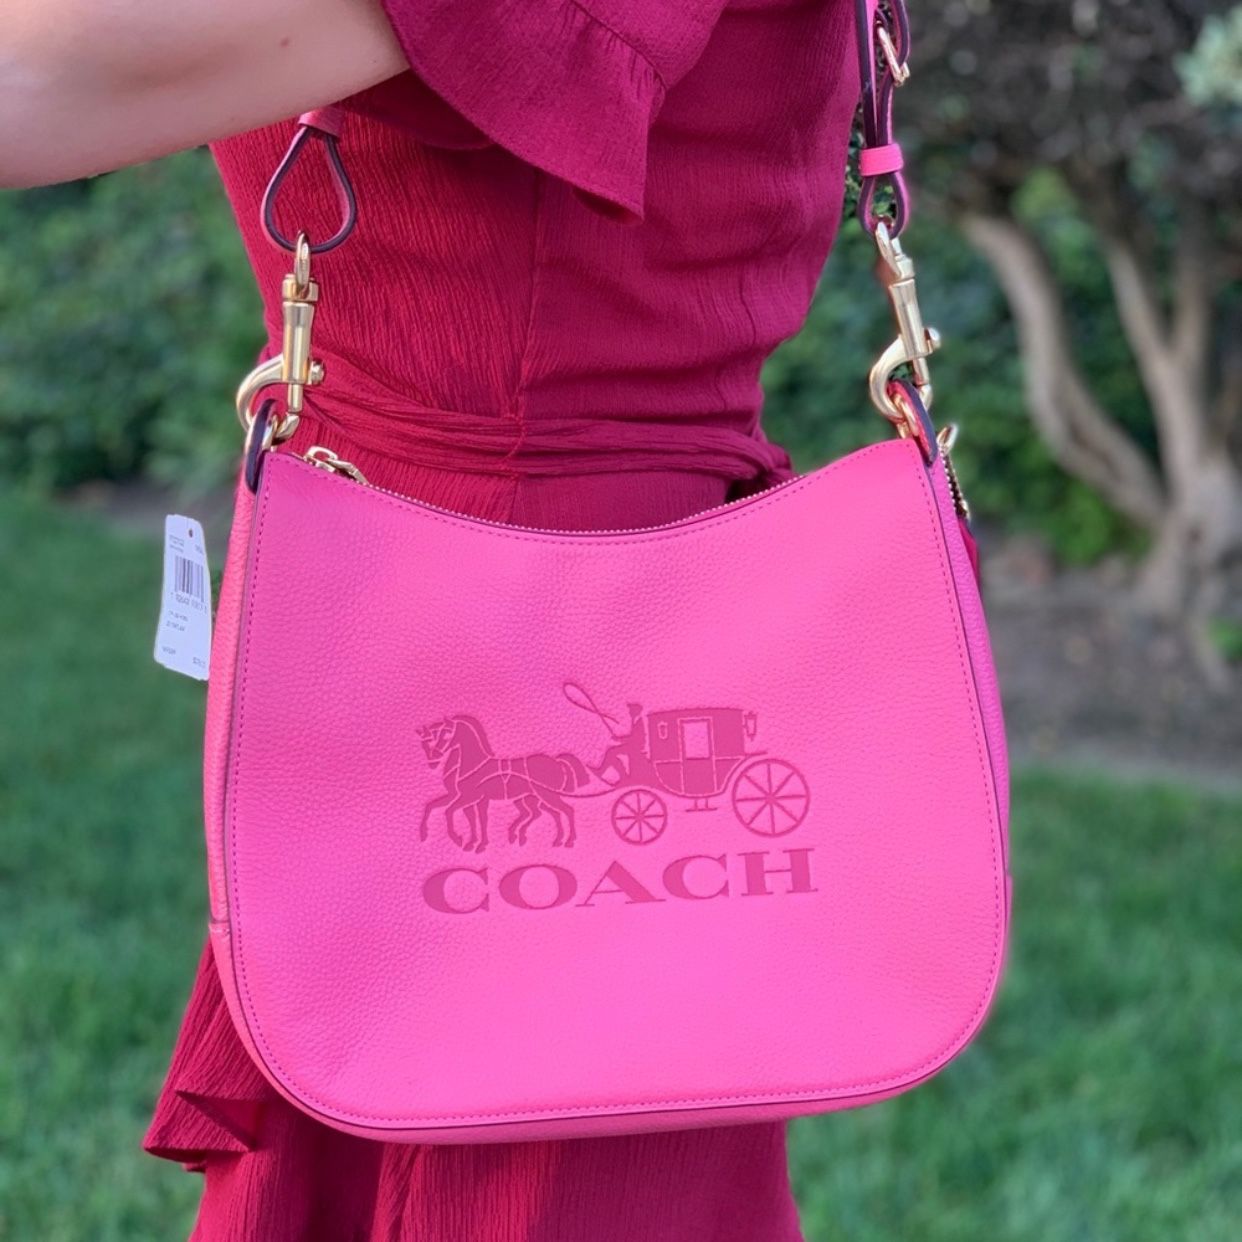 Brand new Coach Jes Pink Leather Hobo Purse